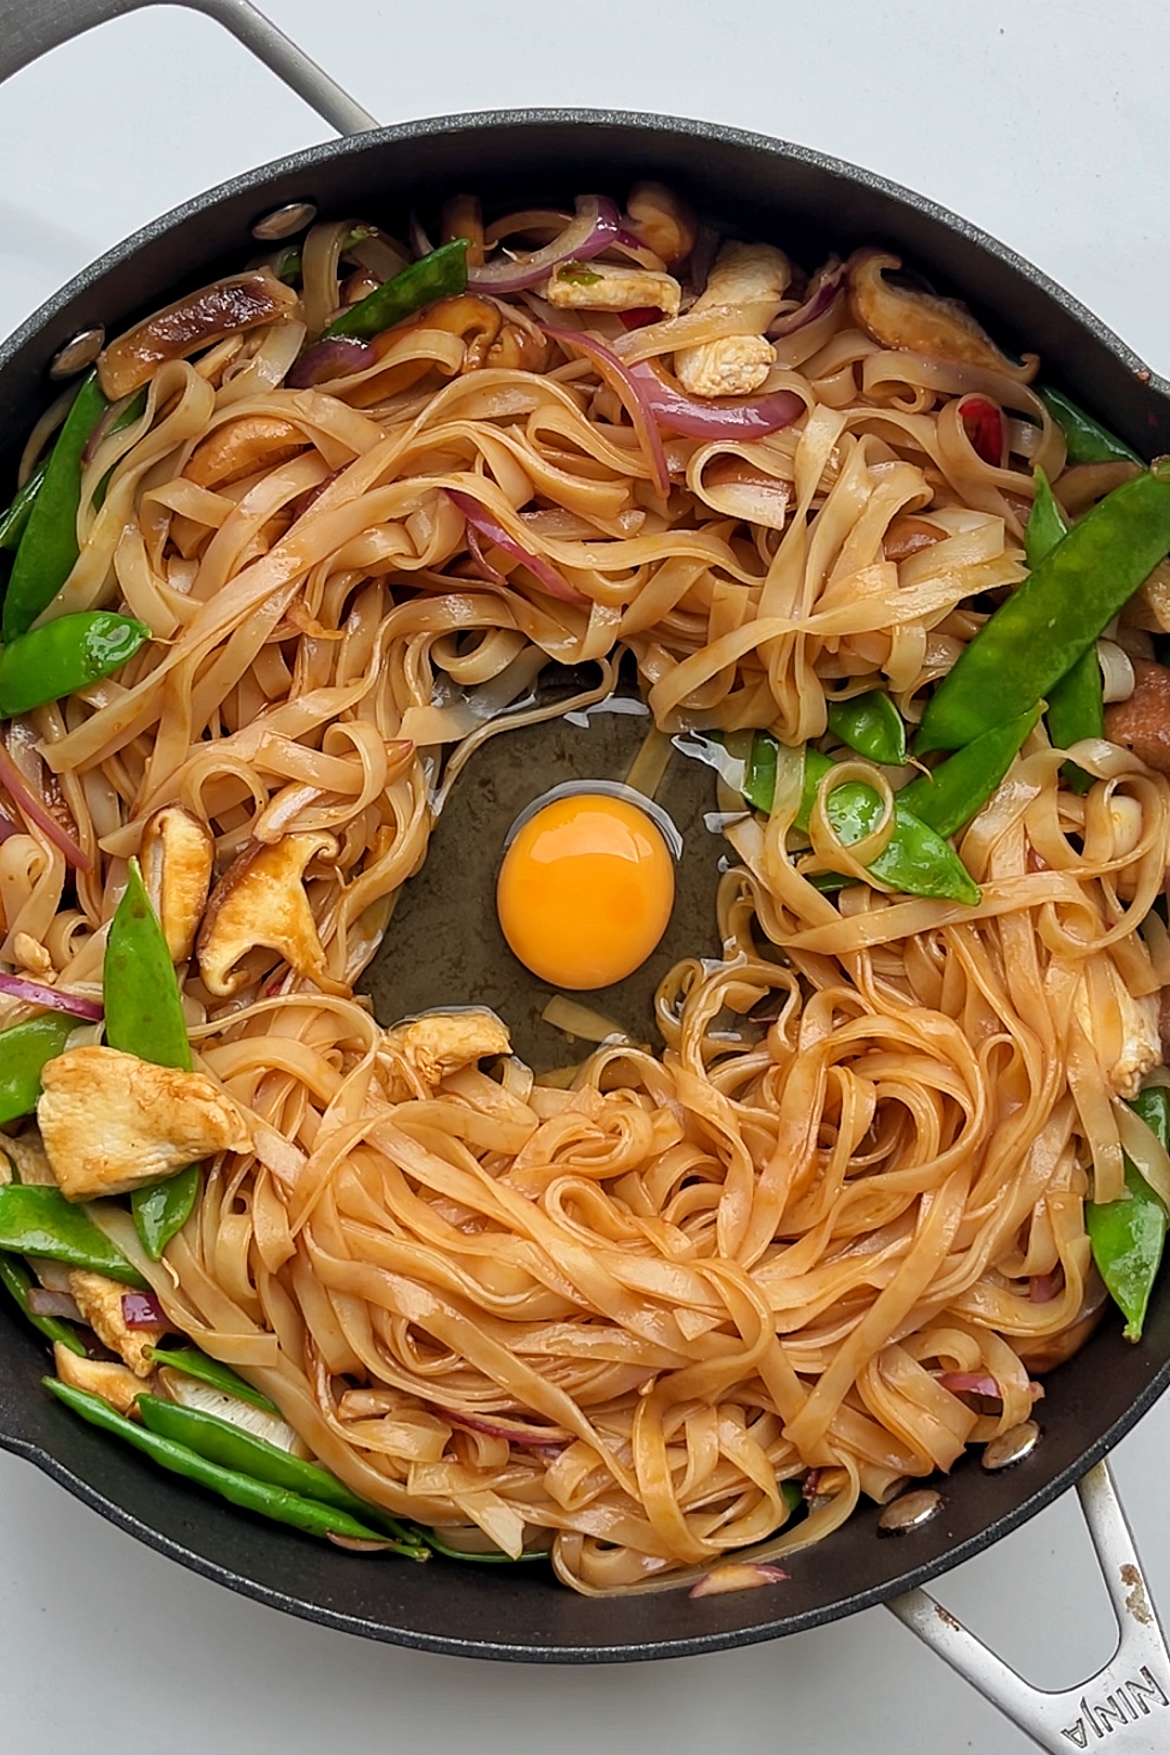 Stir fried noodles with egg in the centre.